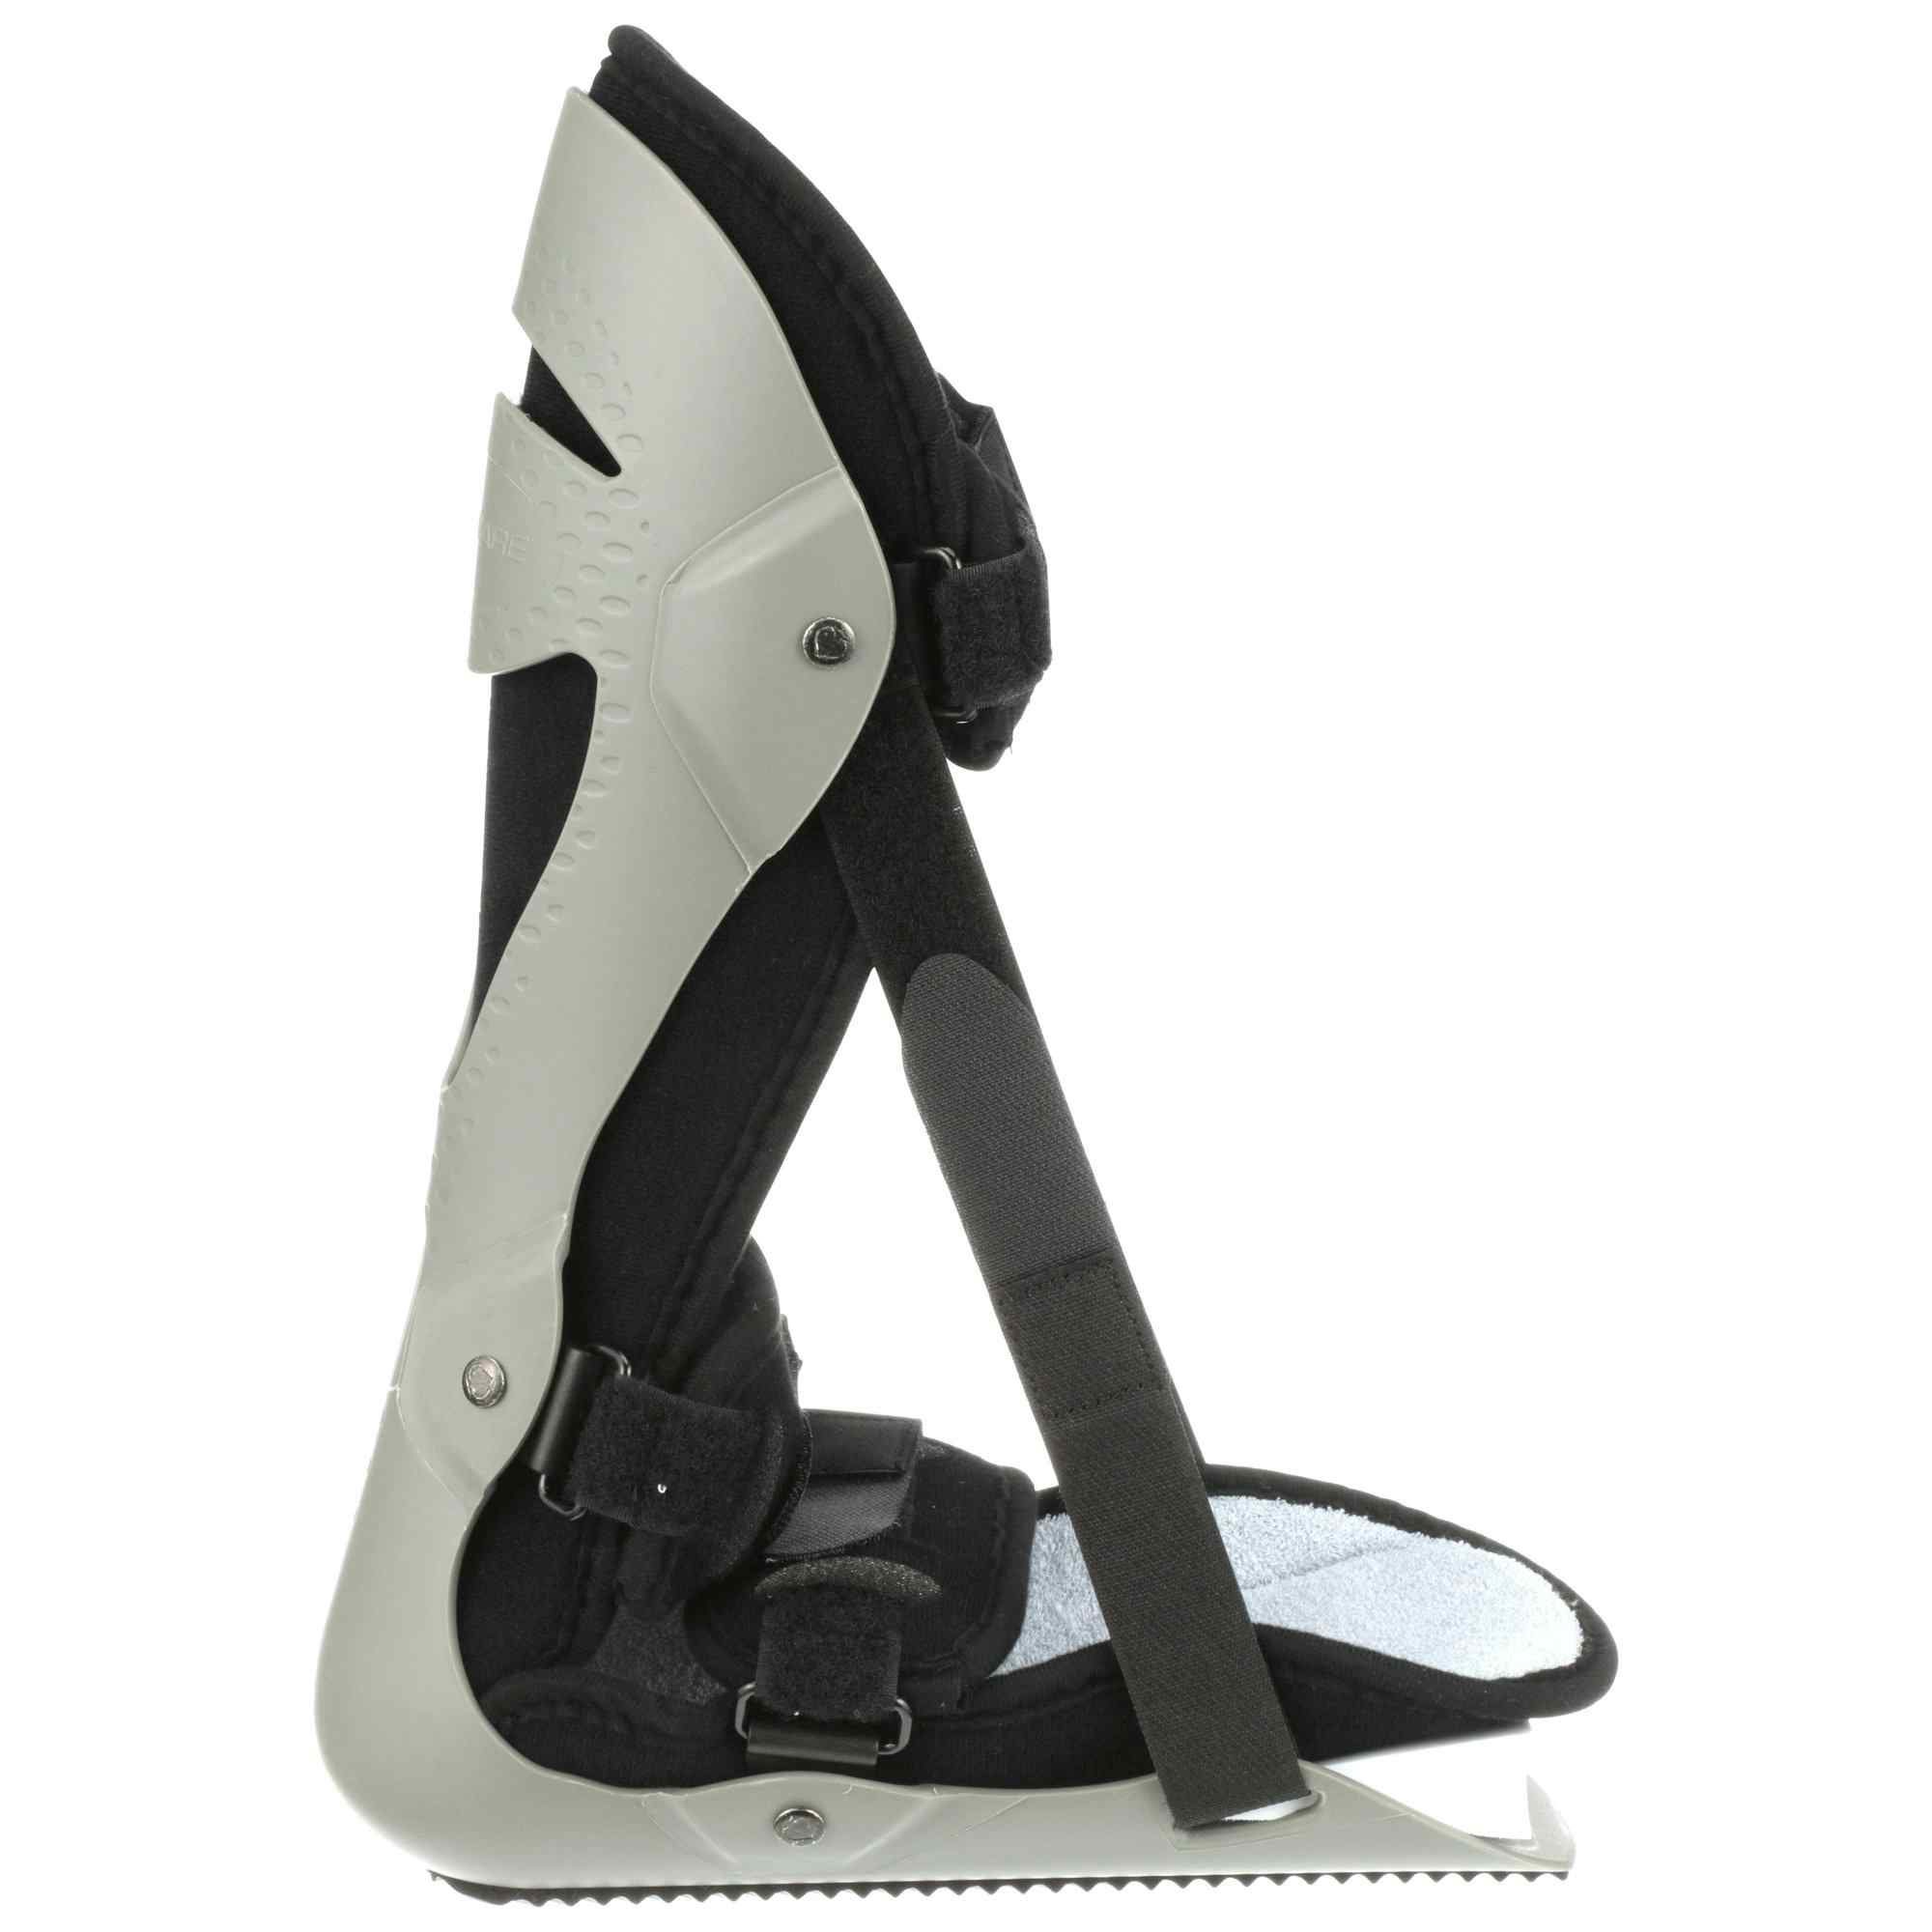 McKesson Adjustable Flexion Straps with Toe Wedge Plantar Fasciitis Night Splint, 155-79-97753, Small (Male Up to 6/Female Up to 7) - 1 Each